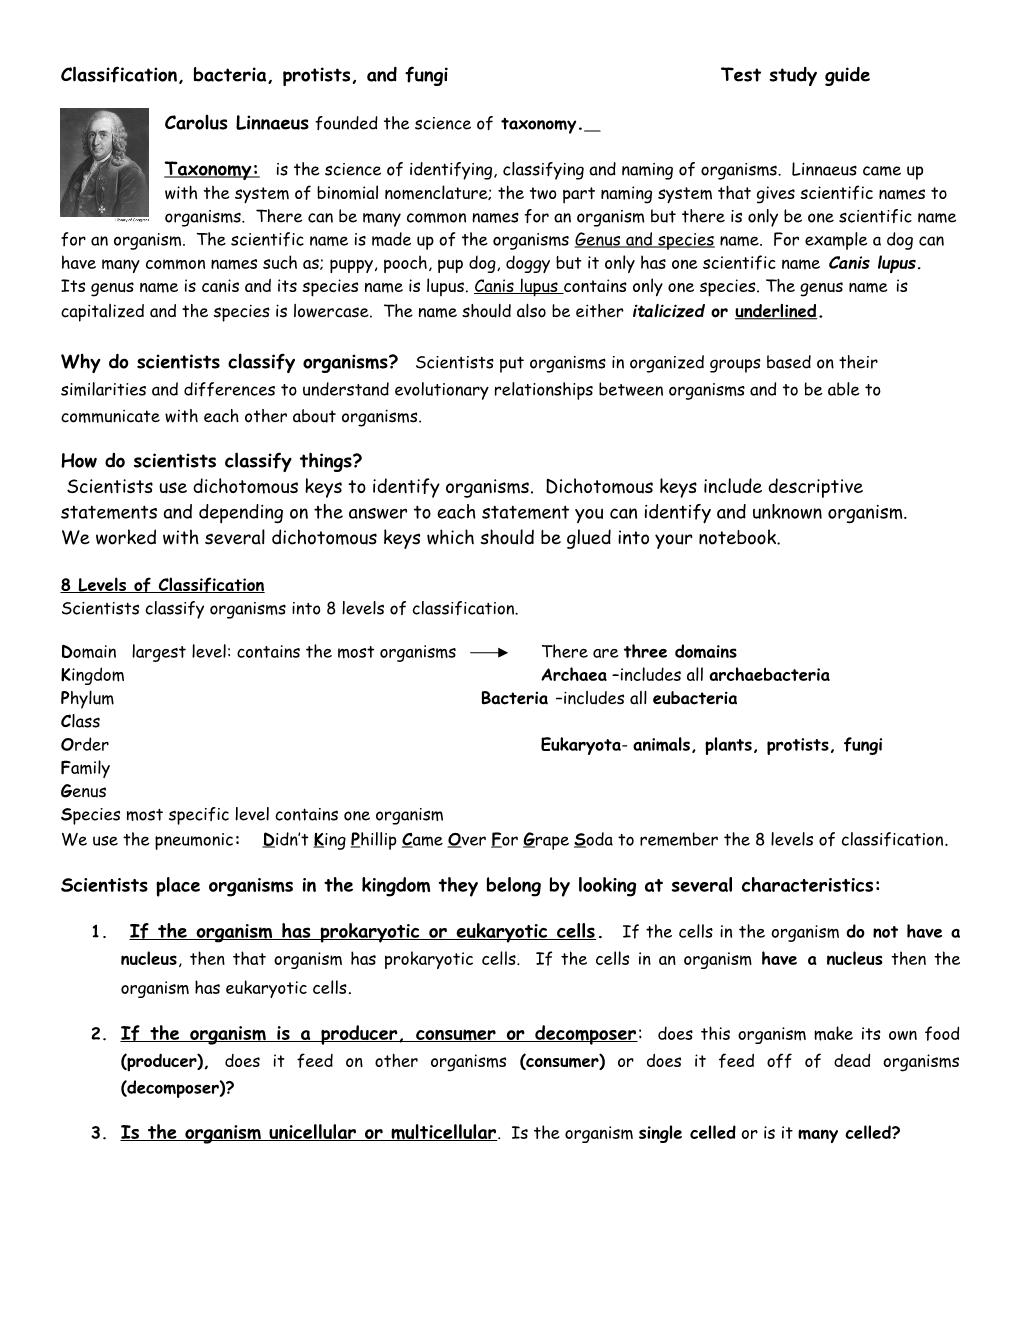 Classification, Bacteria, Protists, and Fungi Test Study Guide